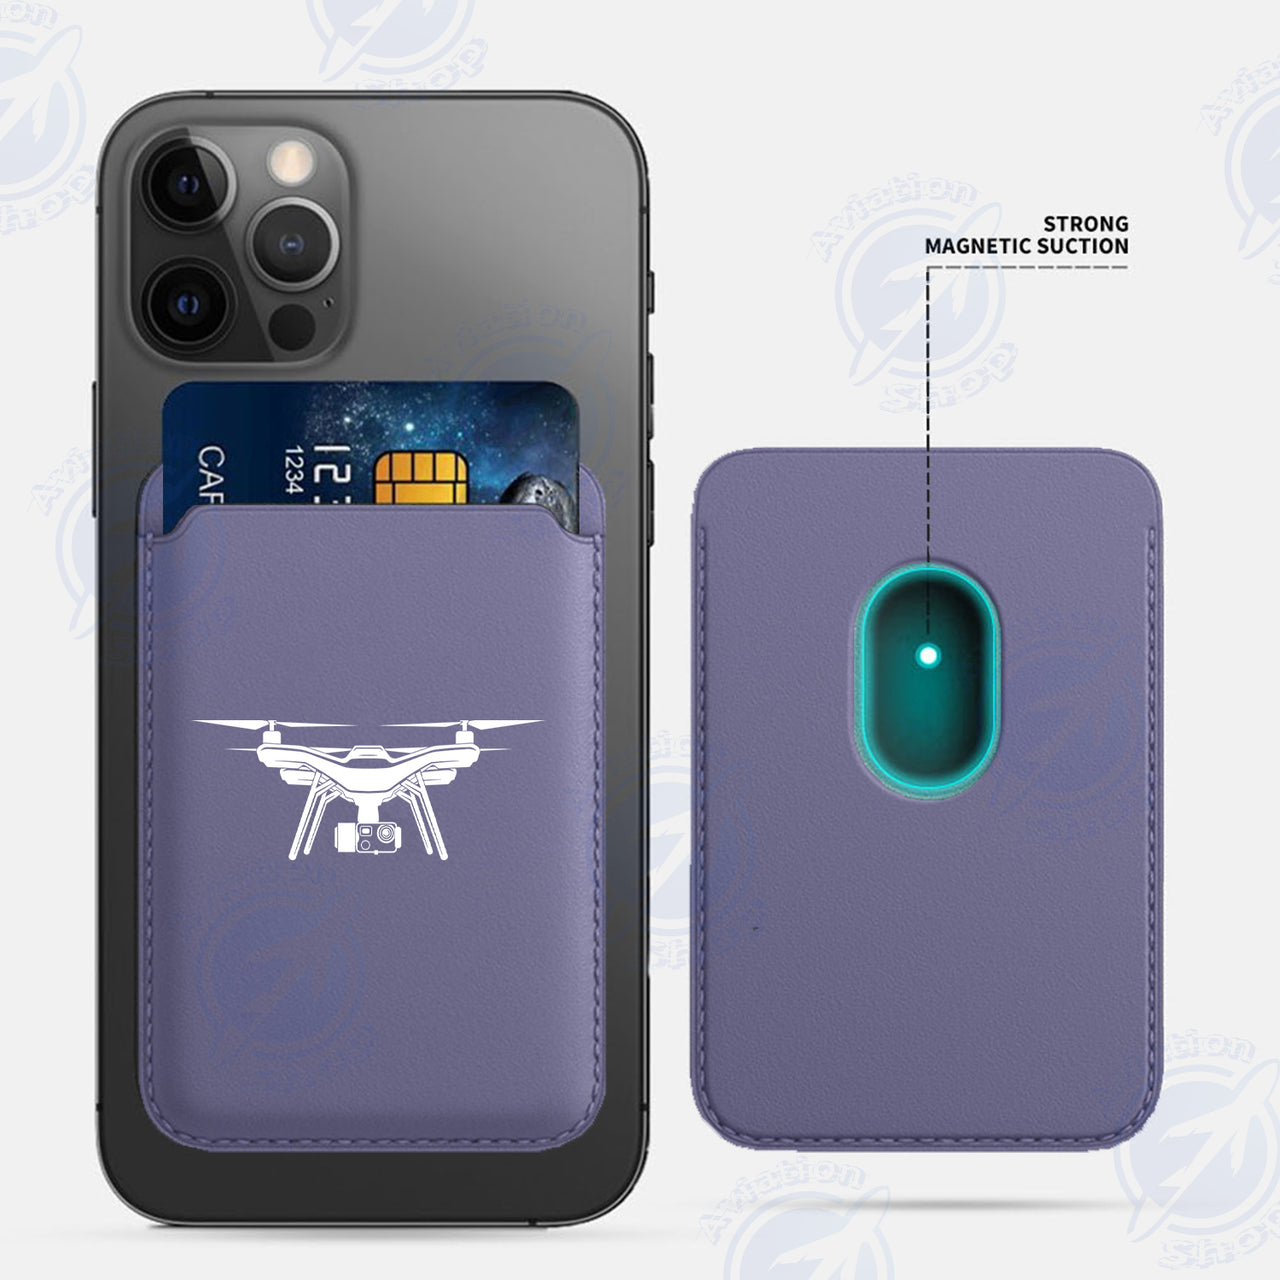 Drone Silhouette iPhone Cases Magnetic Card Wallet